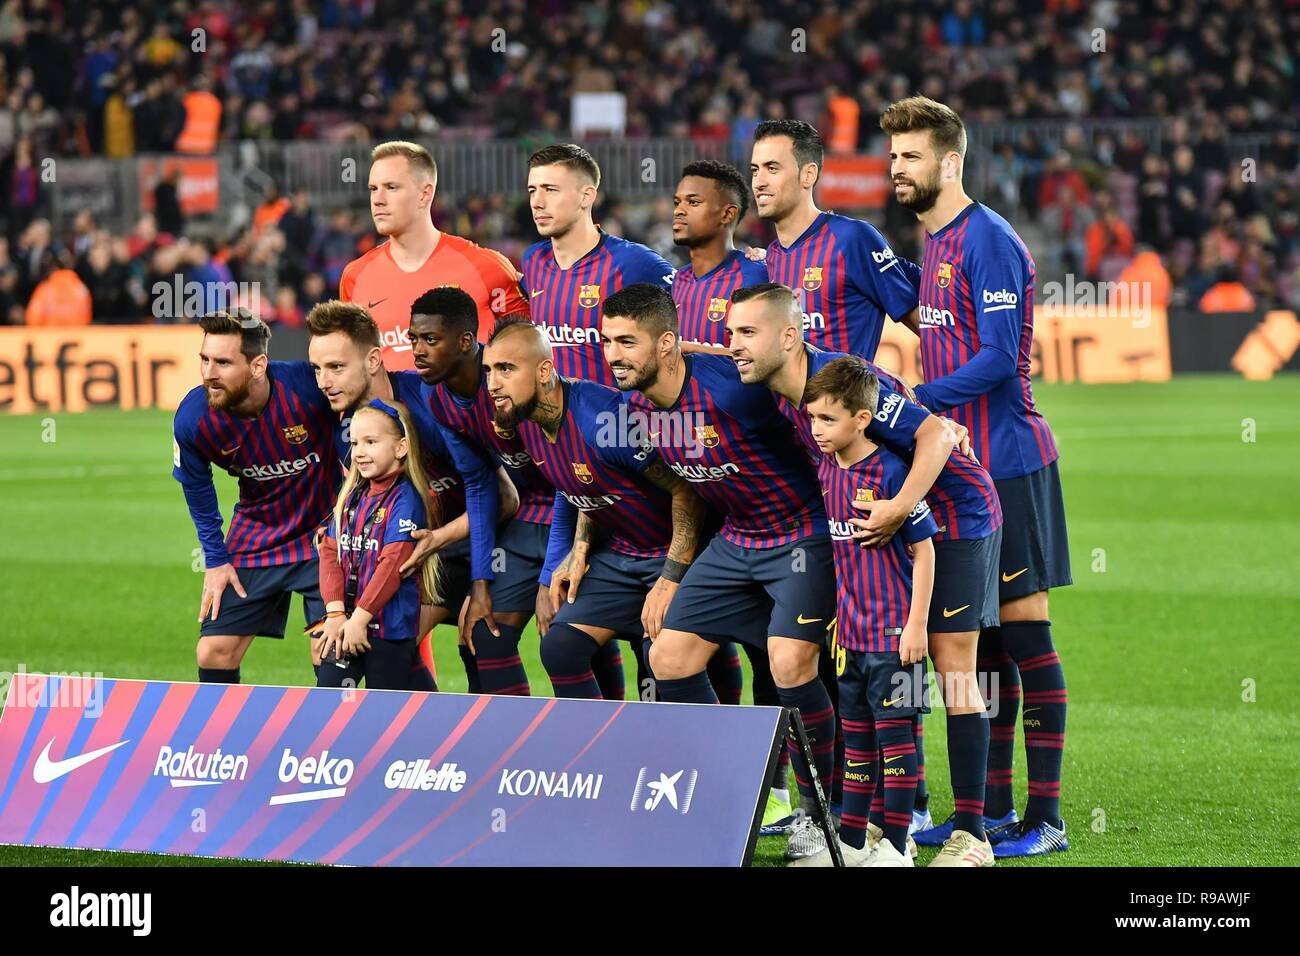 Barcelona, Spain. 22nd Dec 2018. Players of FC Barcelona in action during the spanish league, football match between FC Barcelona and Celta de Vigo on December 22, 2018 at Camp Nou stadium in Barcelona, Spain  Cordon Press Credit: CORDON PRESS/Alamy Live News Stock Photo